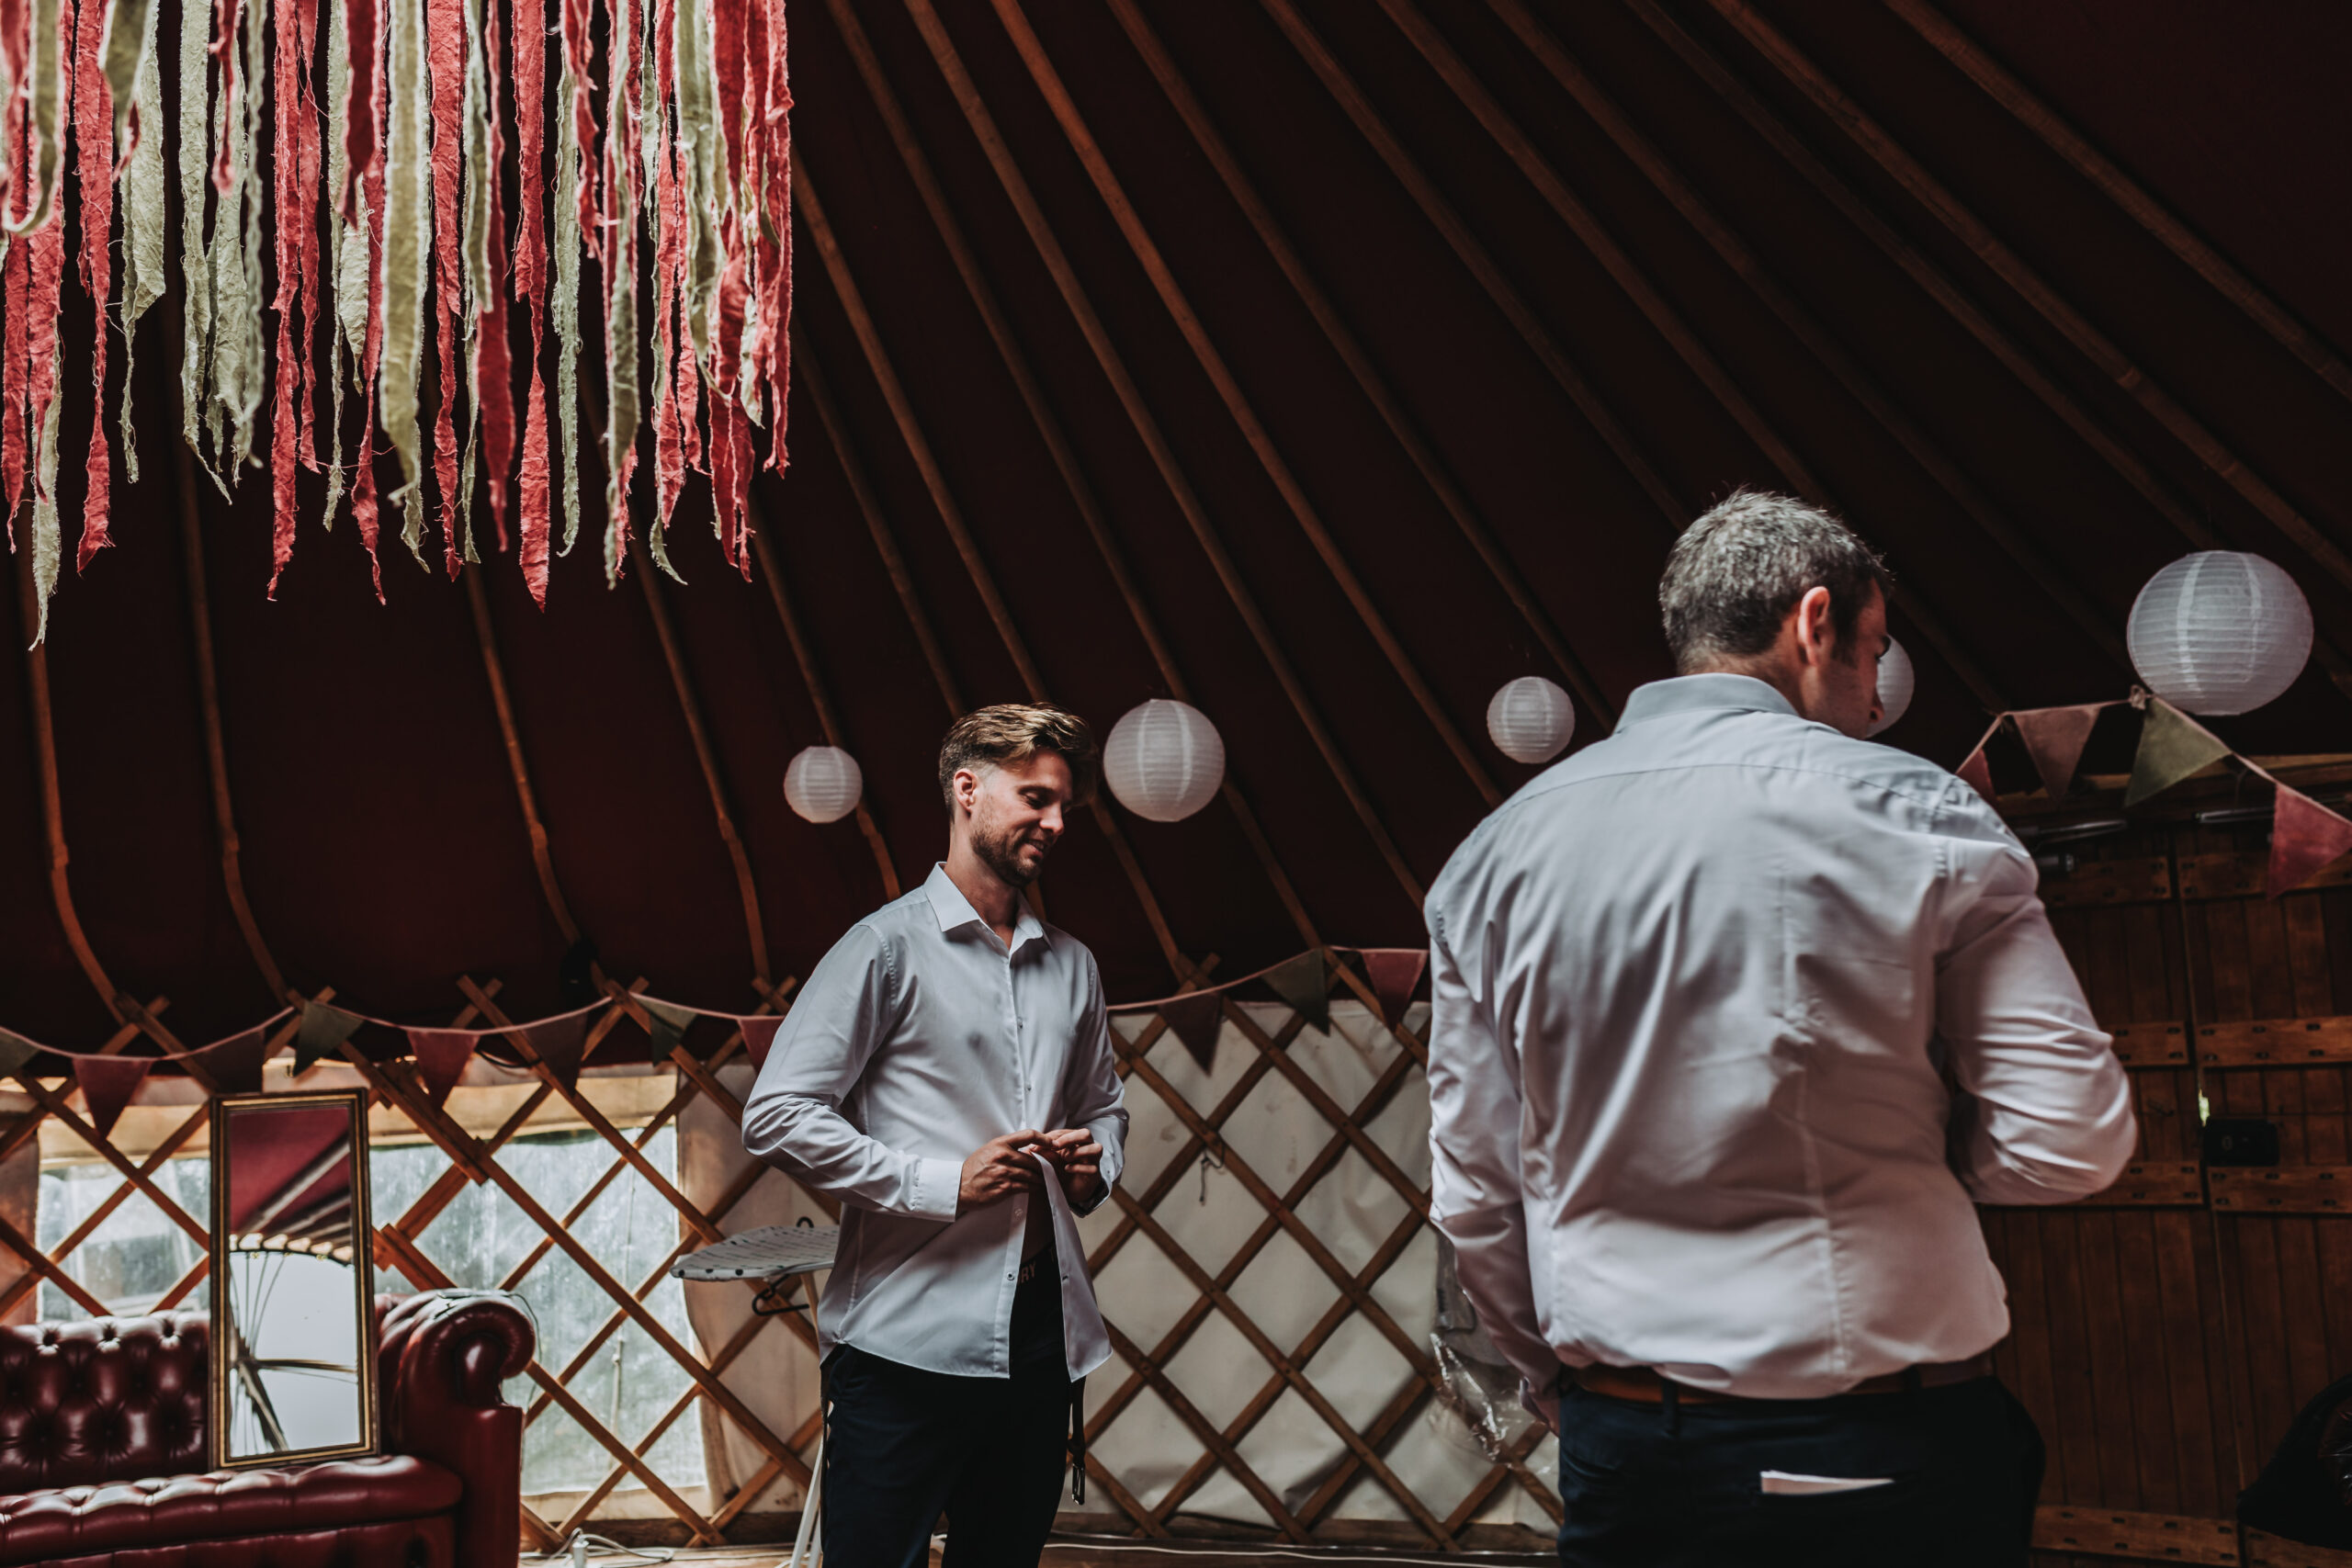 groom putting shirt on in a yurt